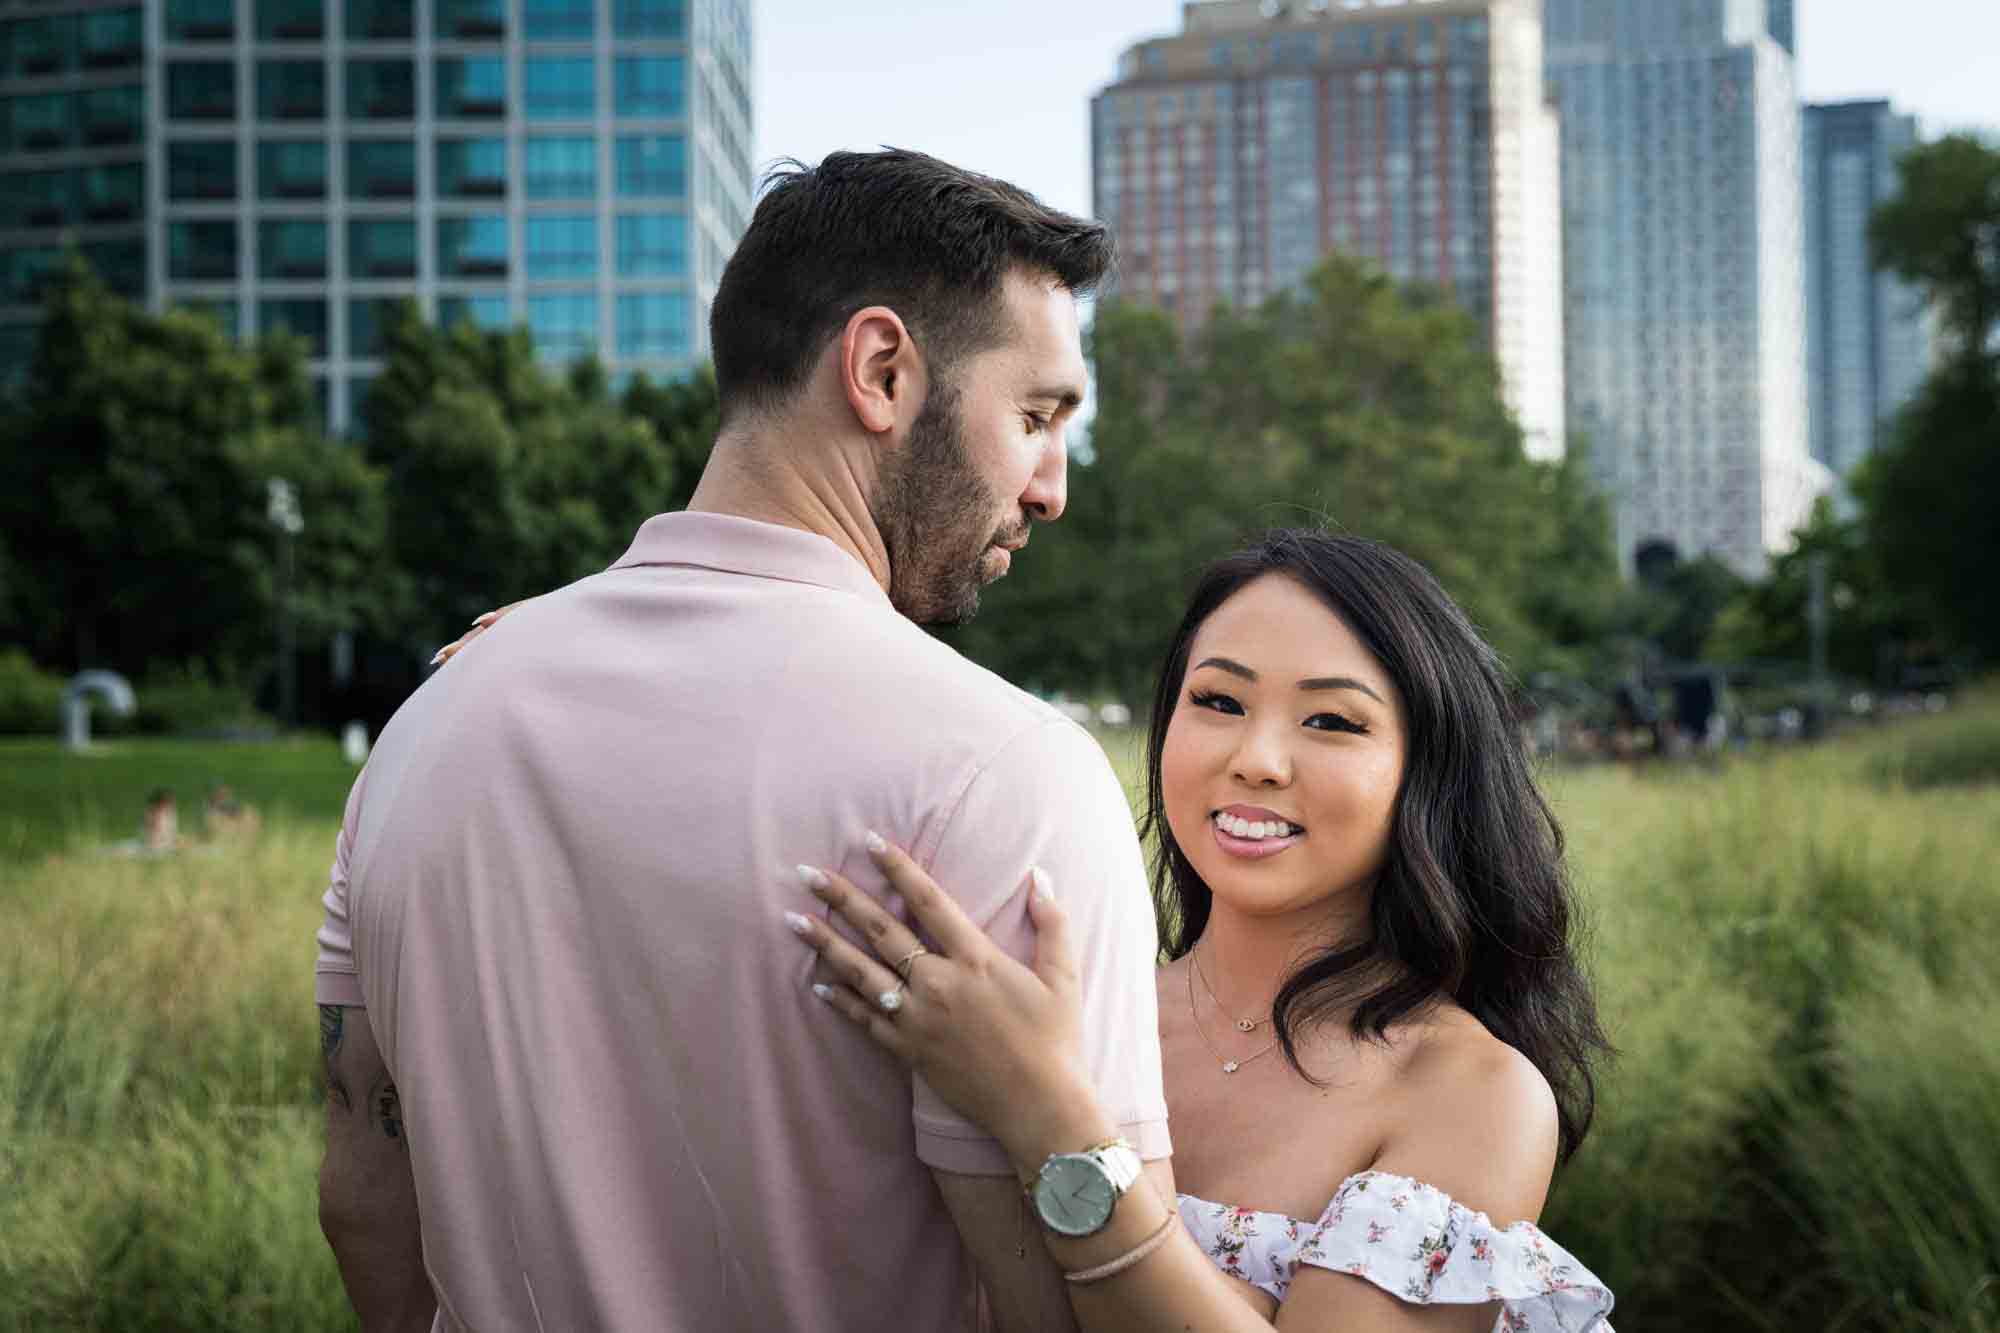 Woman hugging man and showing rose gold engagement ring during a Gantry Plaza State Park engagement photo shoot